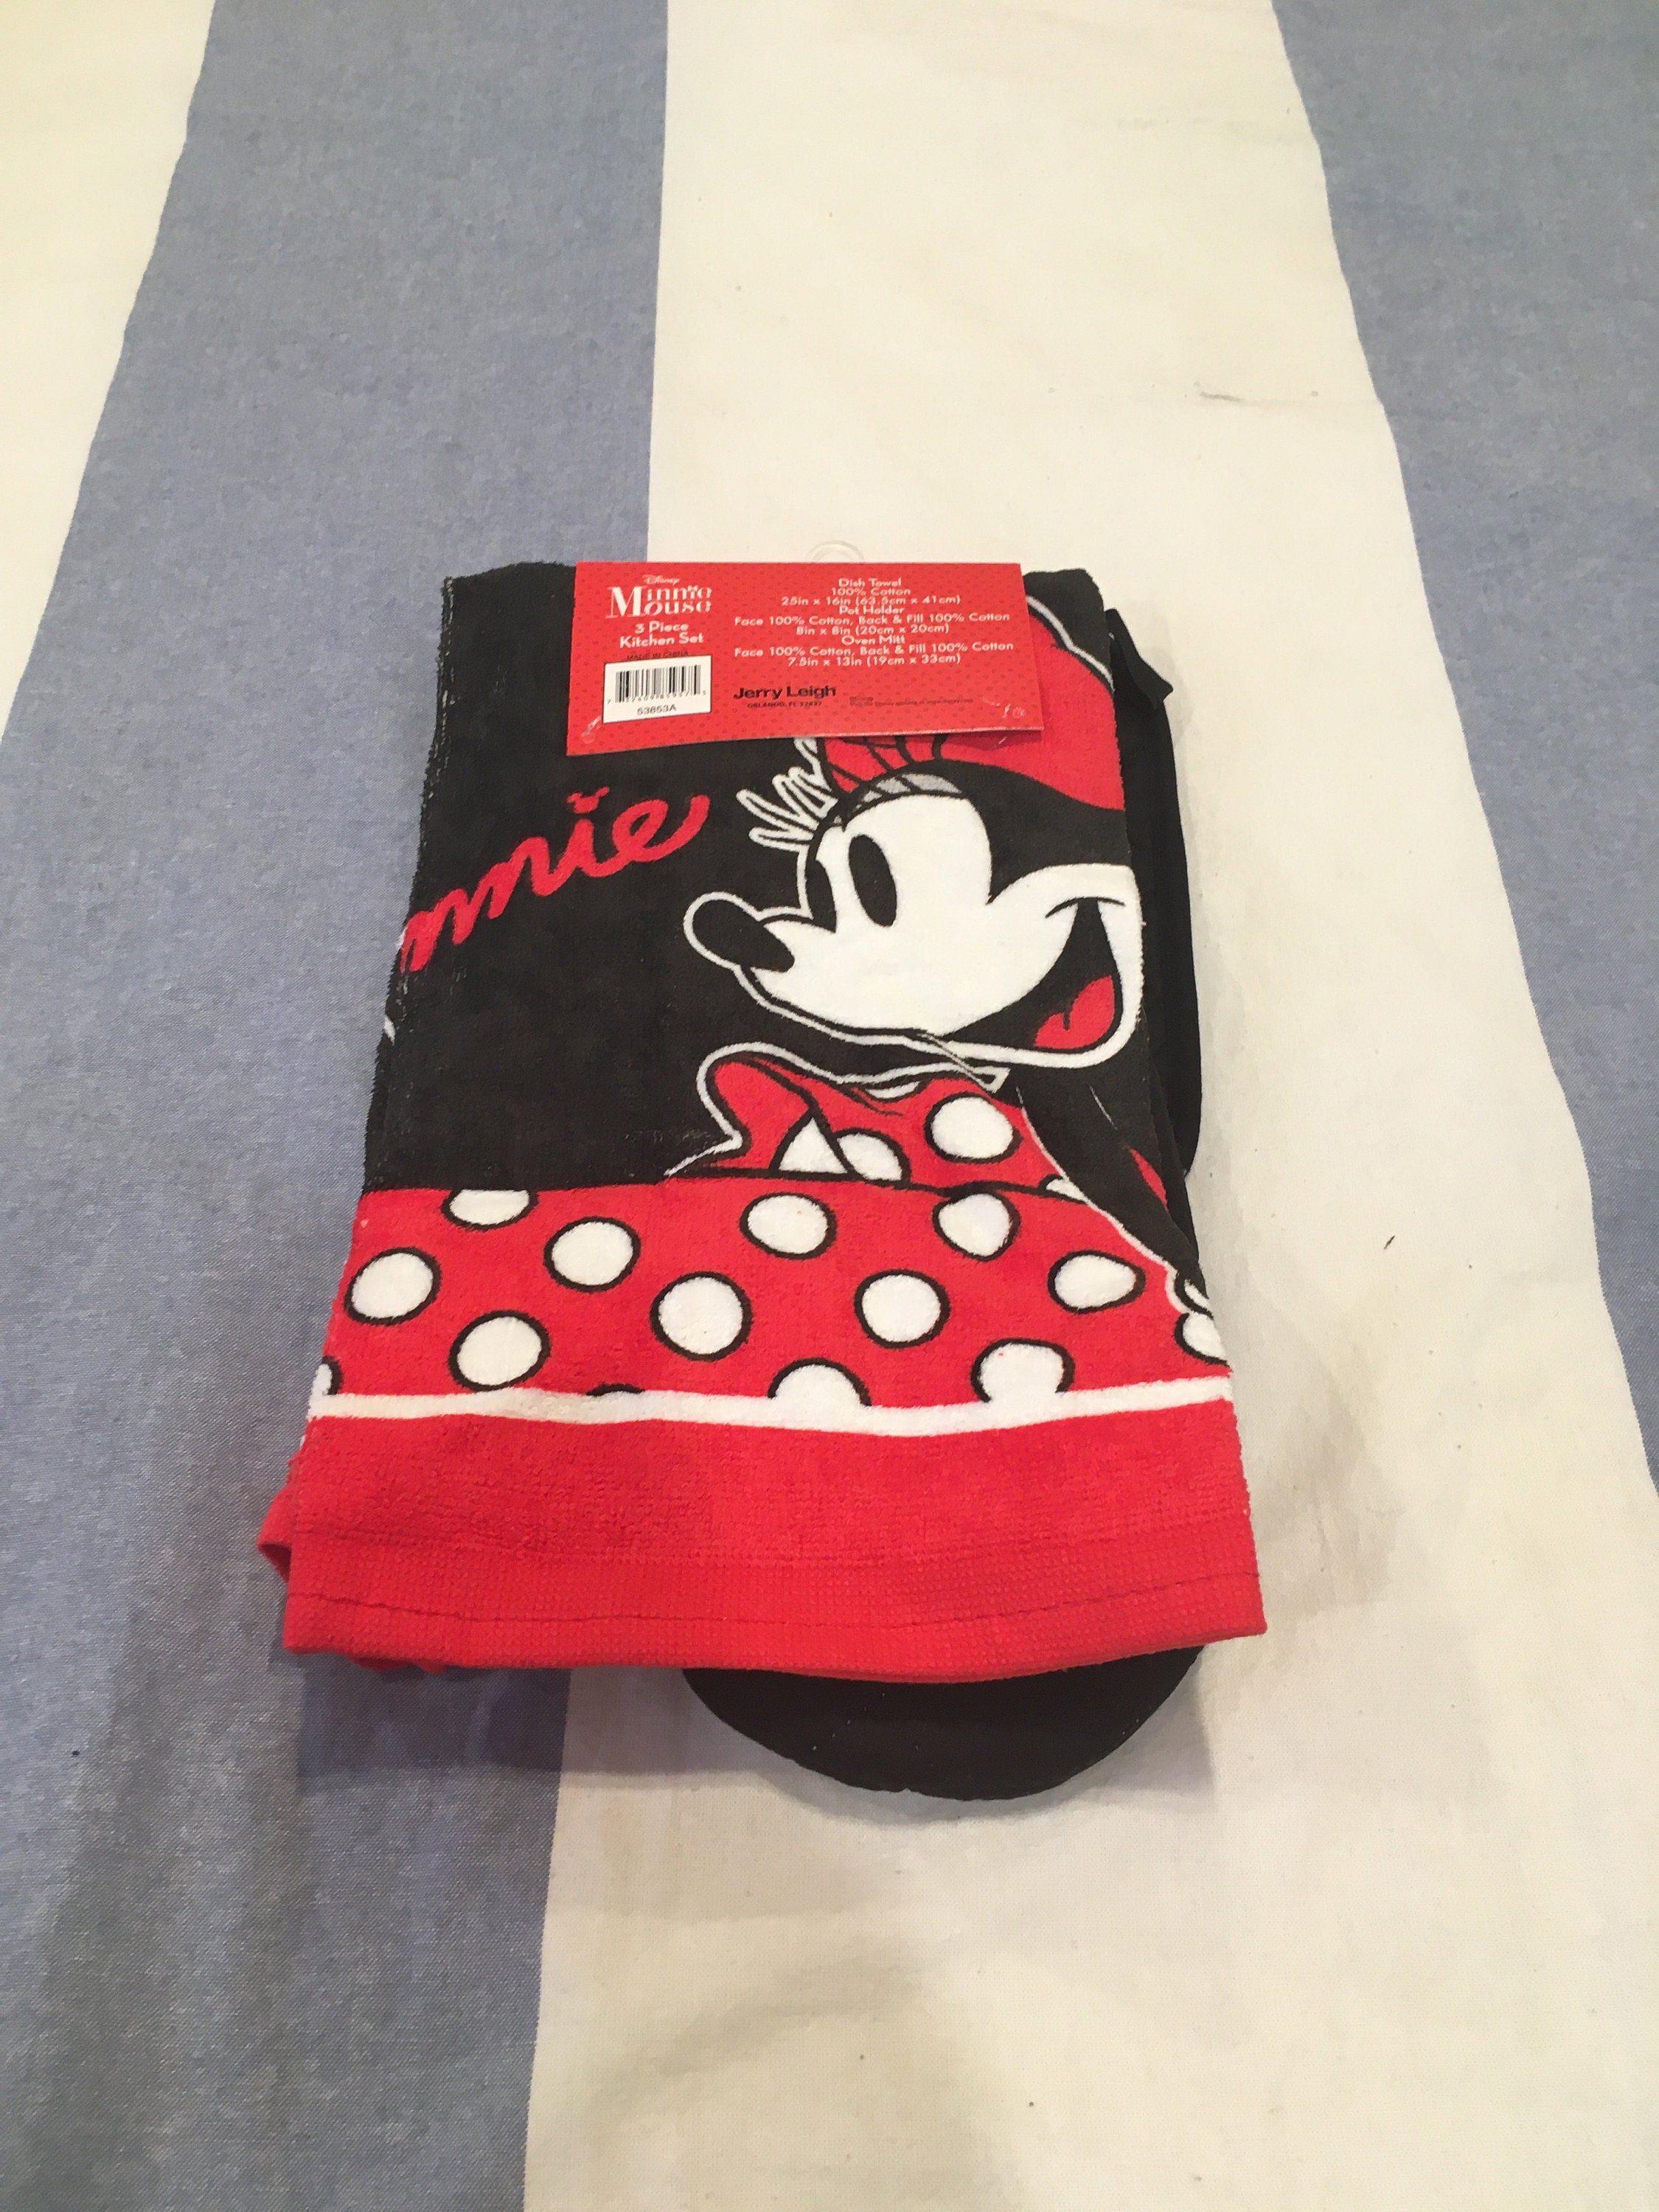 Disney Kitchen Gift Set! Oven Mitts + Potholder + Towel + Cooking Tools!  Minnie Mouse Set with Gift Box! 